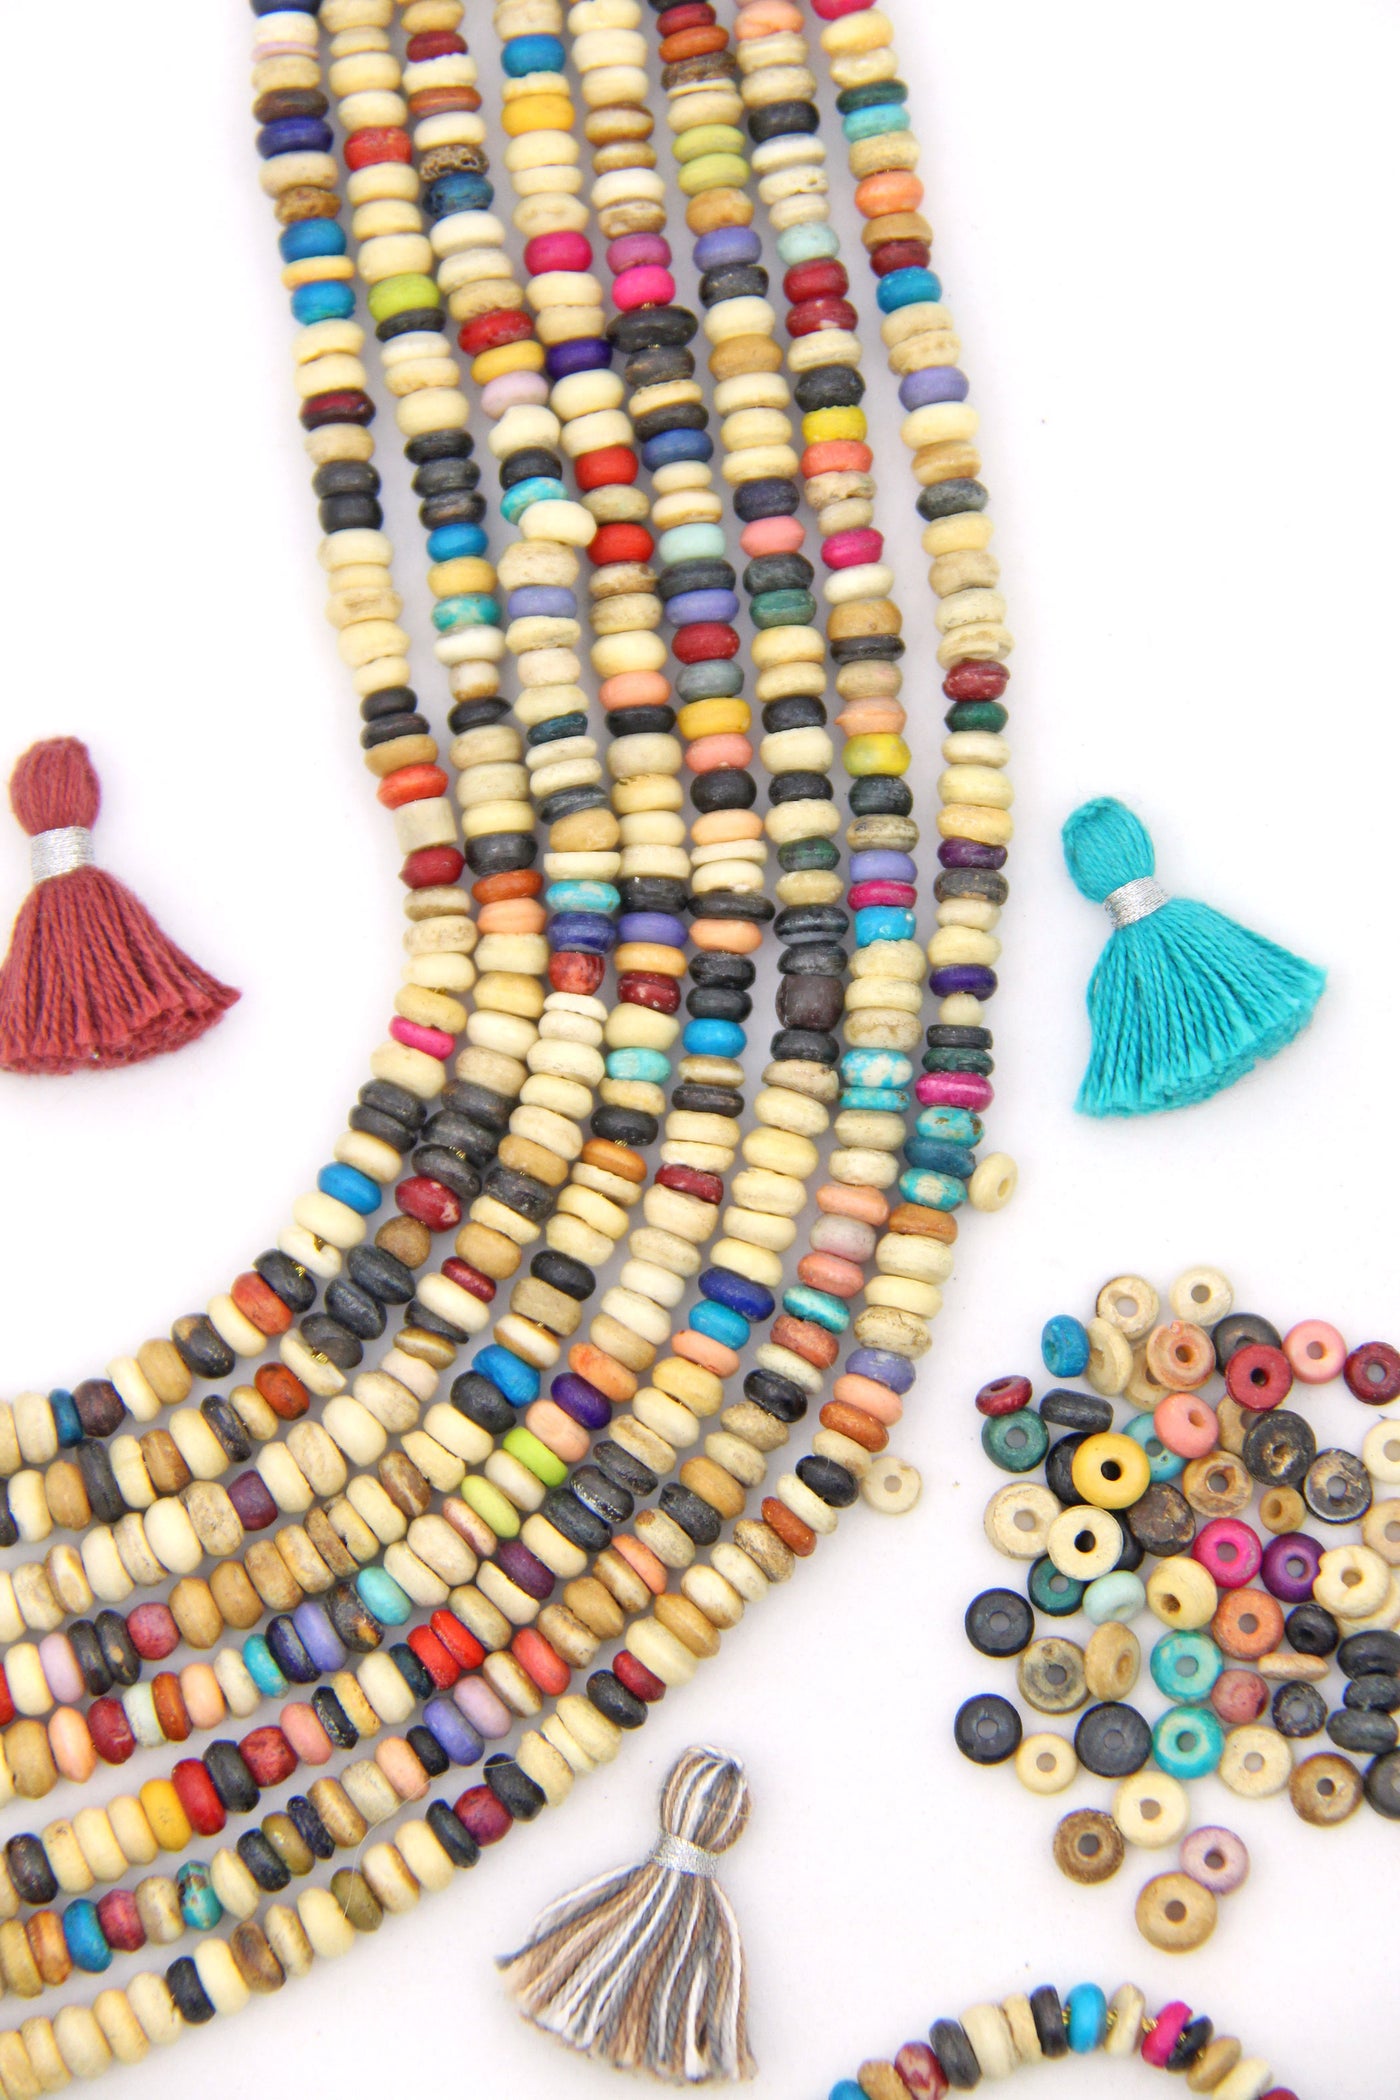 Tussy Mussy Heishi Natural Spacer Beads: 6x2mm Multi Colored Discs - ShopWomanShopsWorld.com for Artisan made DIY jewelry and craft supplies, natural beads, African Beads, tassels